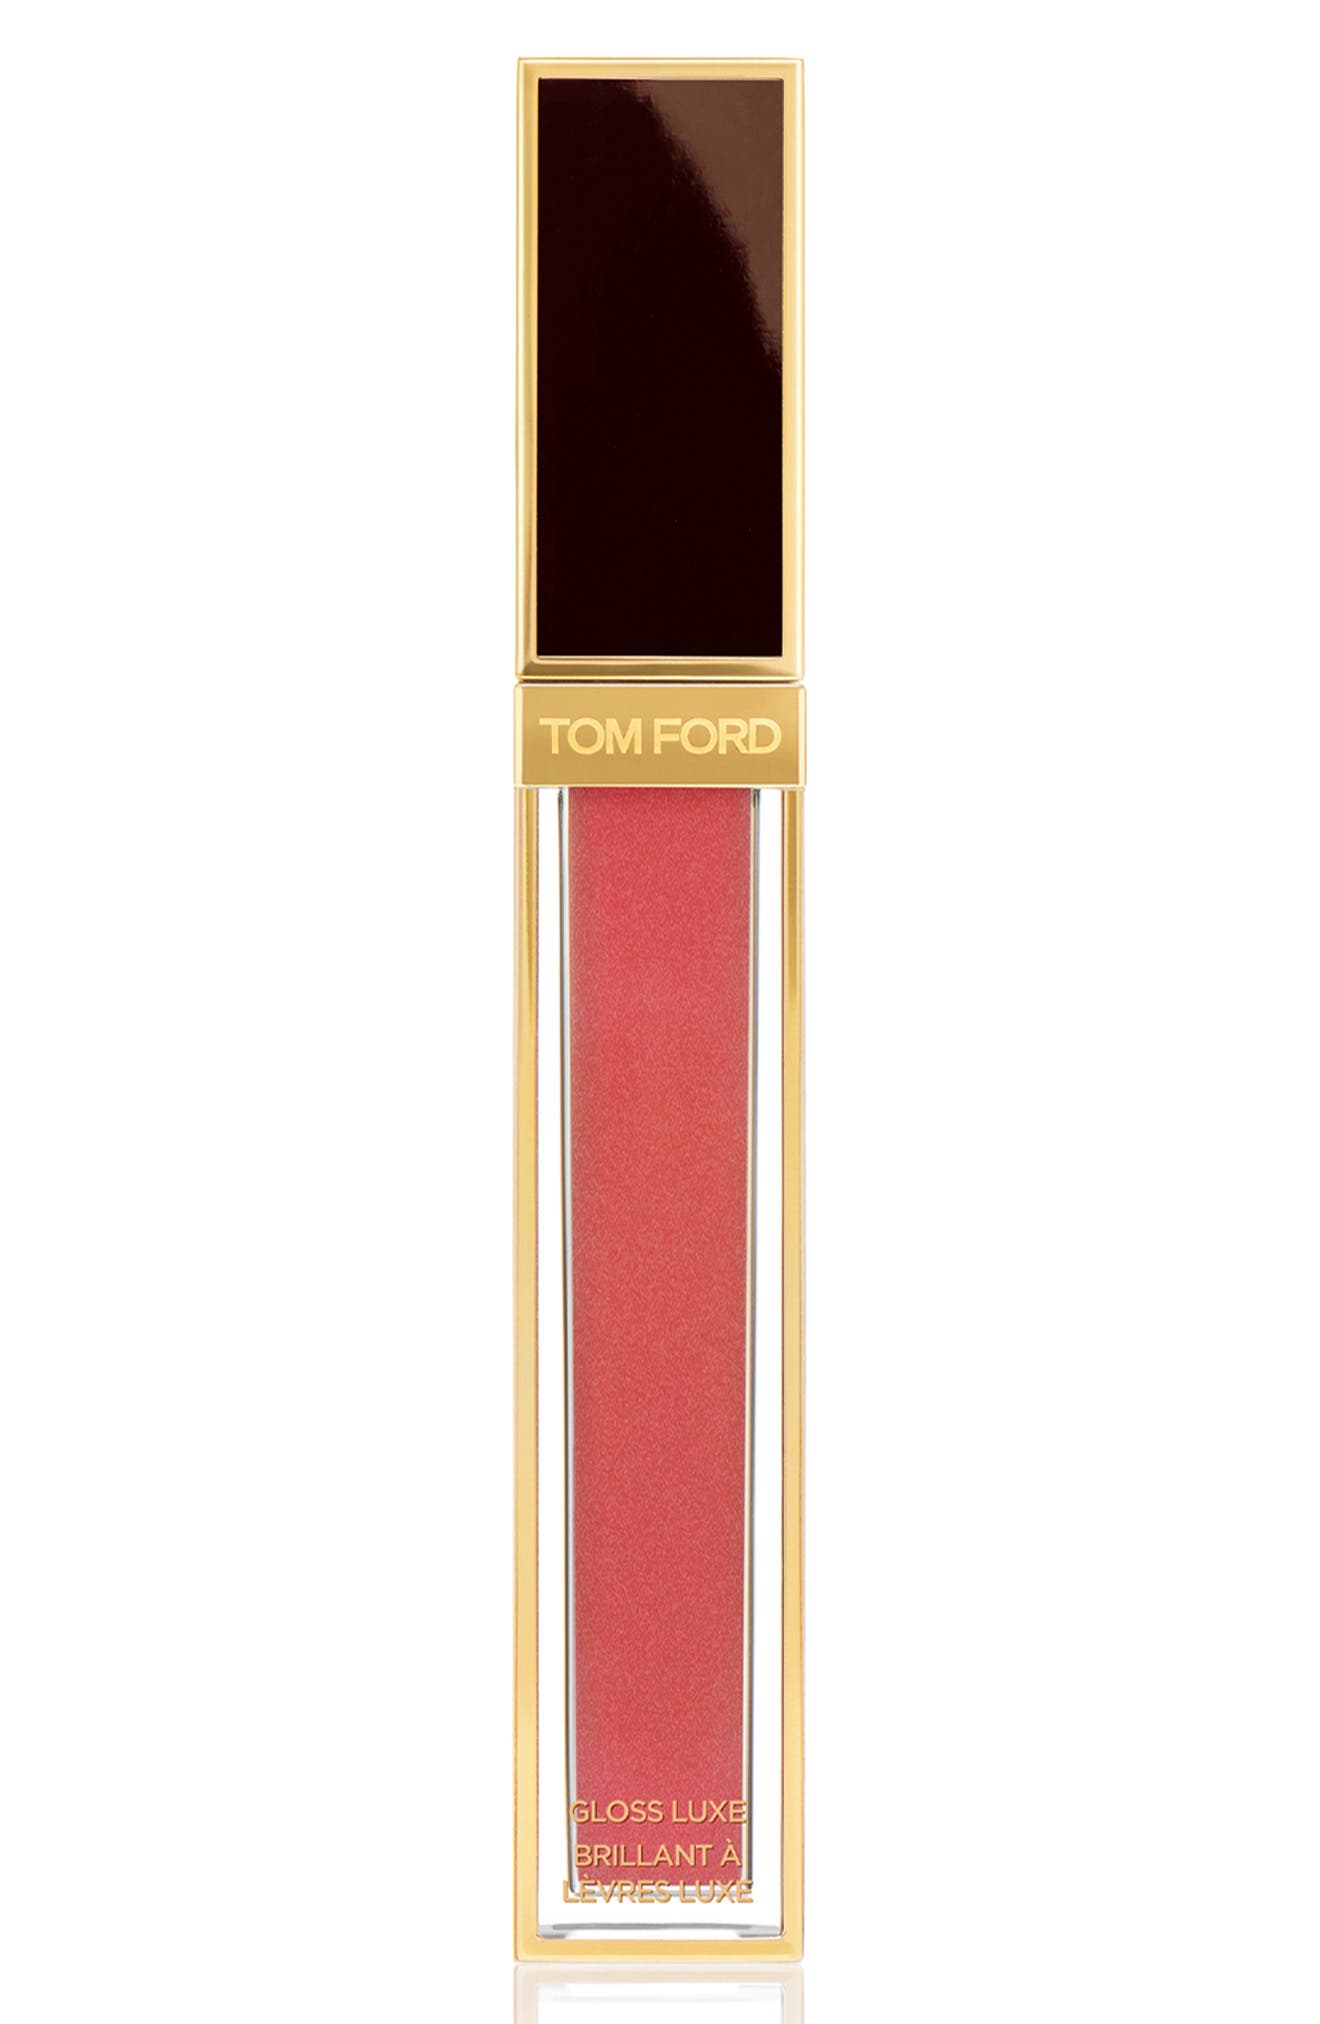 UPC 888066088862 product image for Tom Ford Gloss Luxe Moisturizing Lipgloss - 03 Tantalize | upcitemdb.com